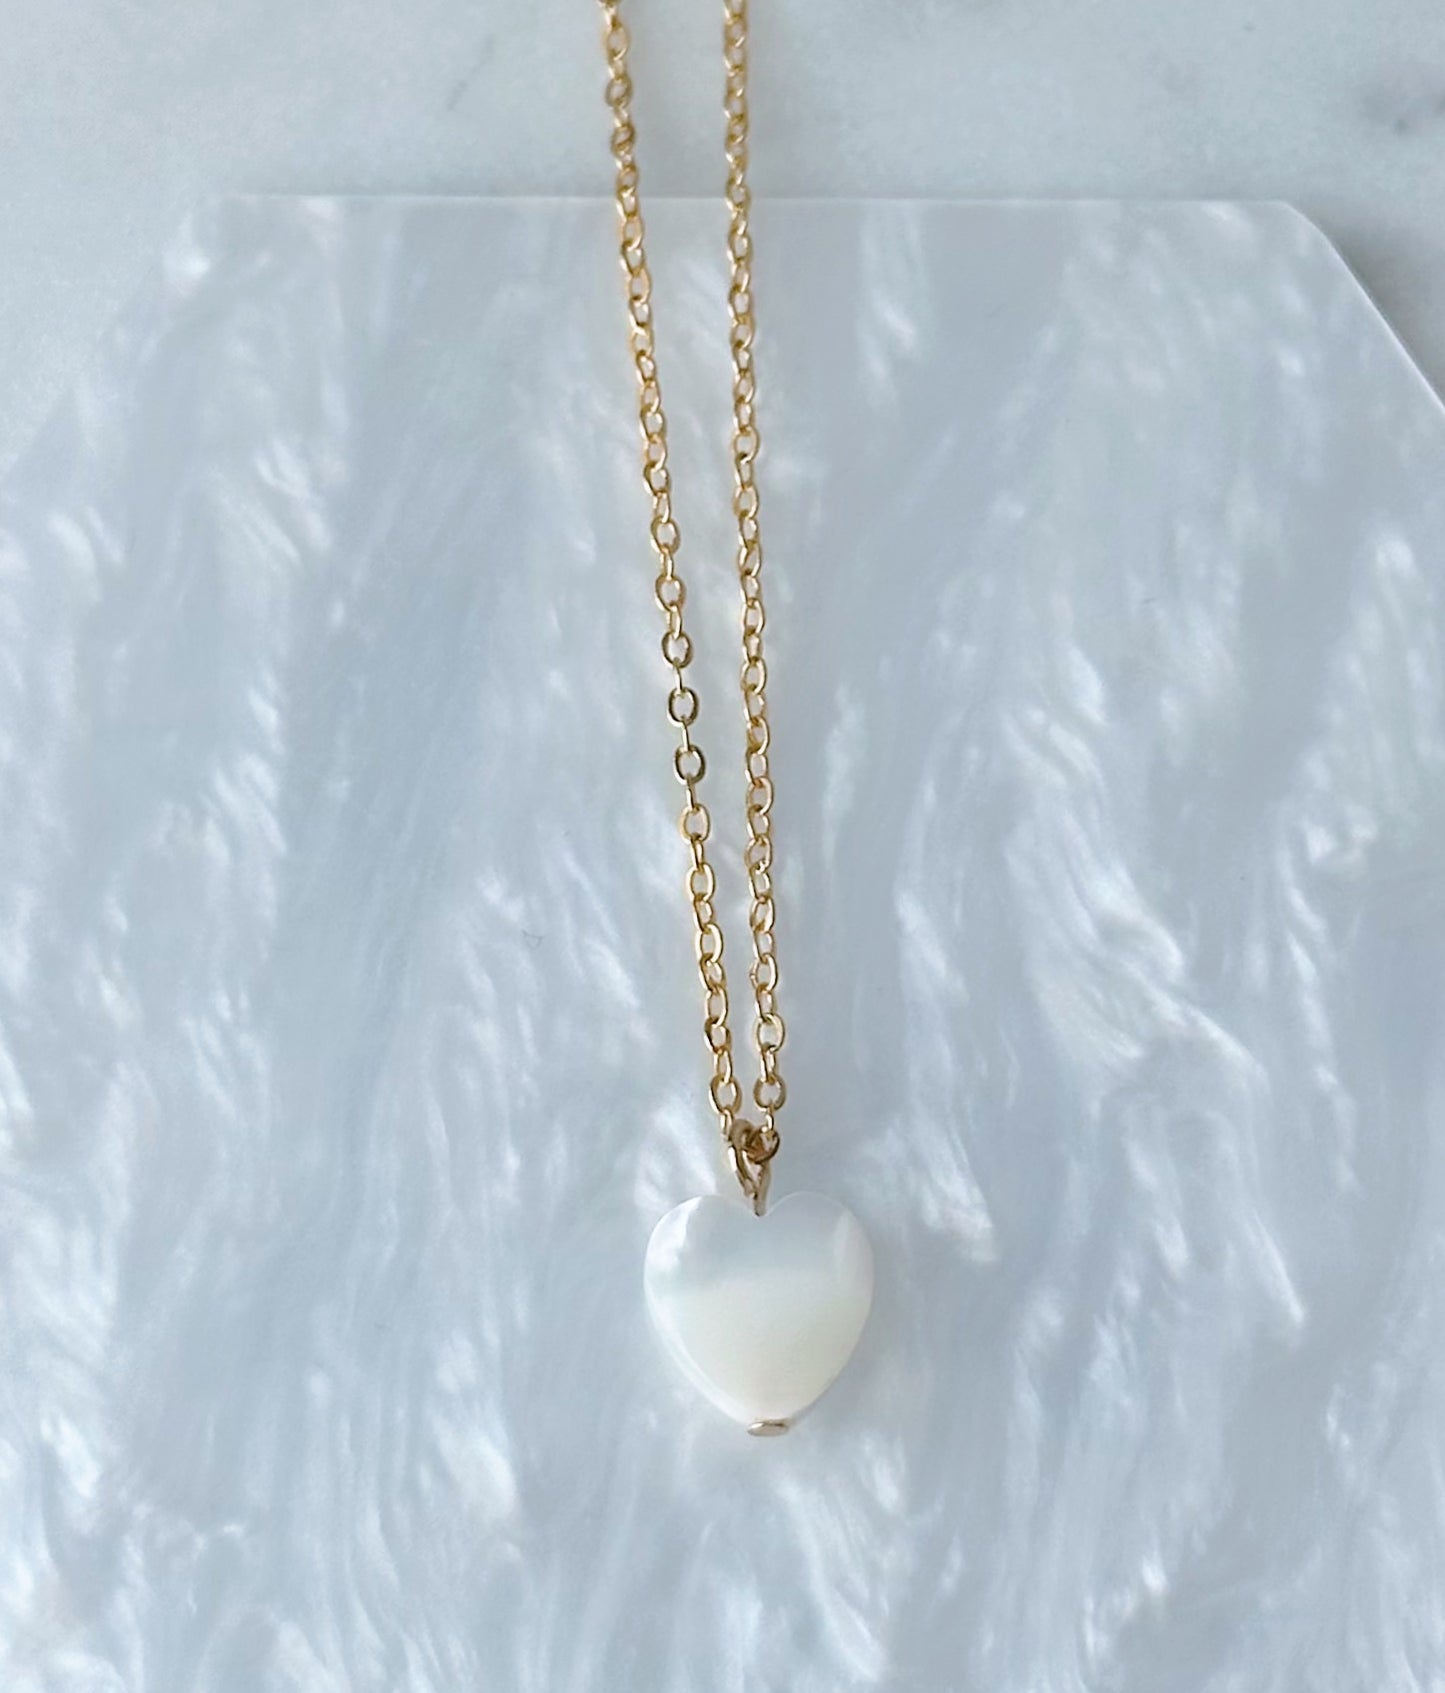 Shell heart pendant necklace